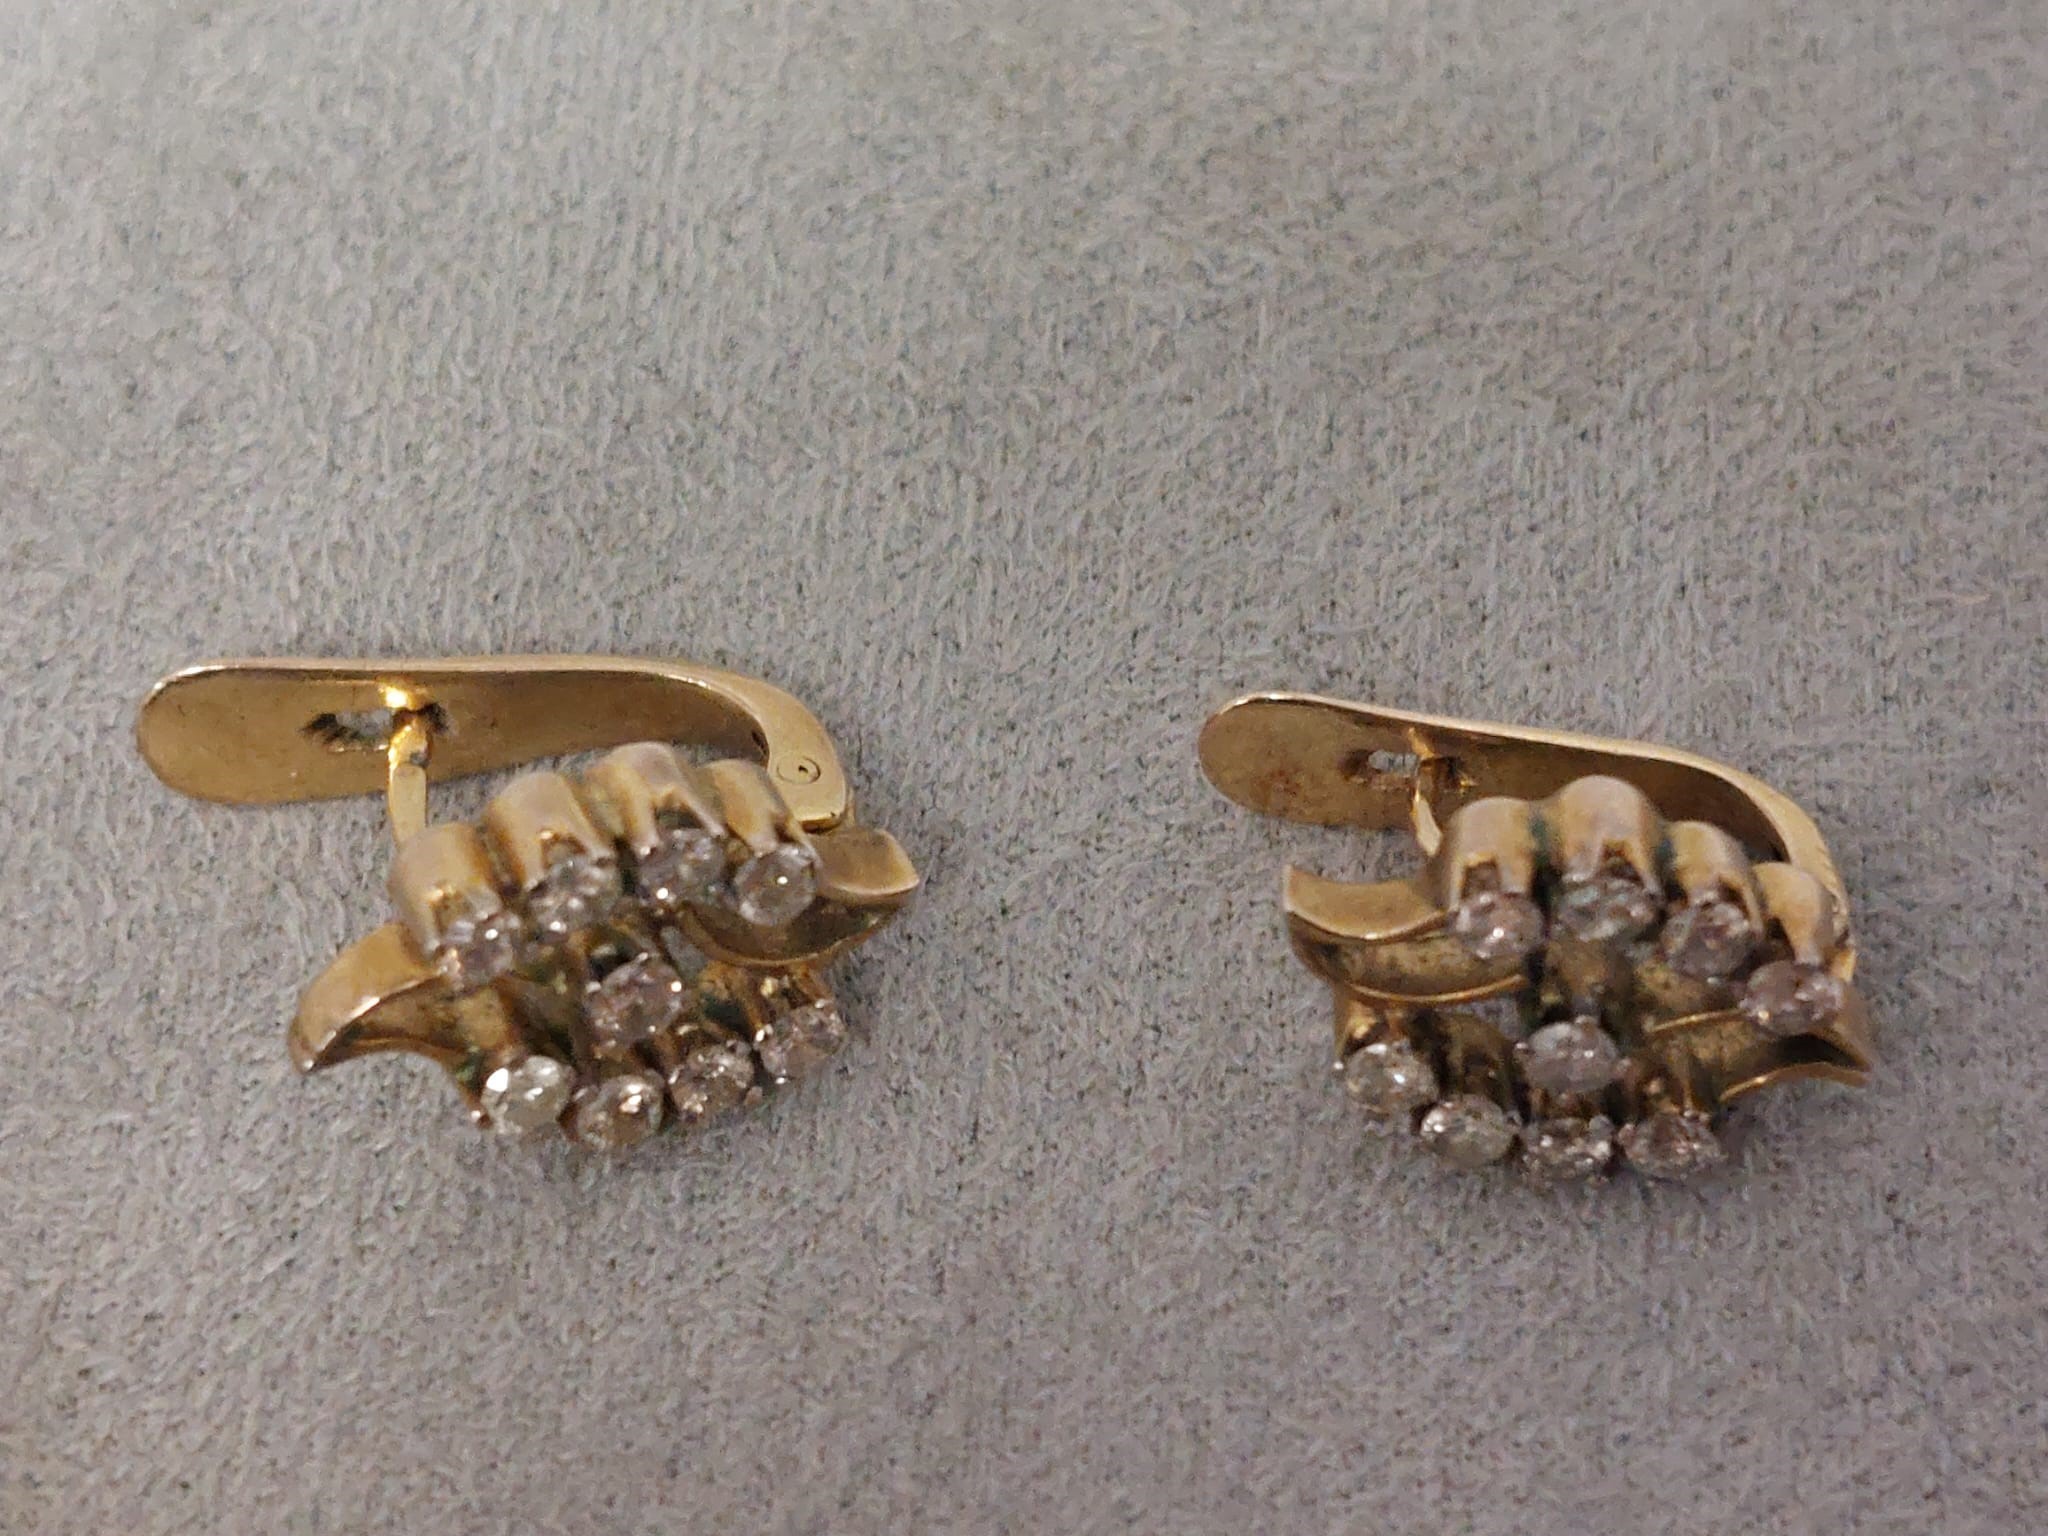 A Christian Dior brooch and earings set, and other earings - Image 6 of 8